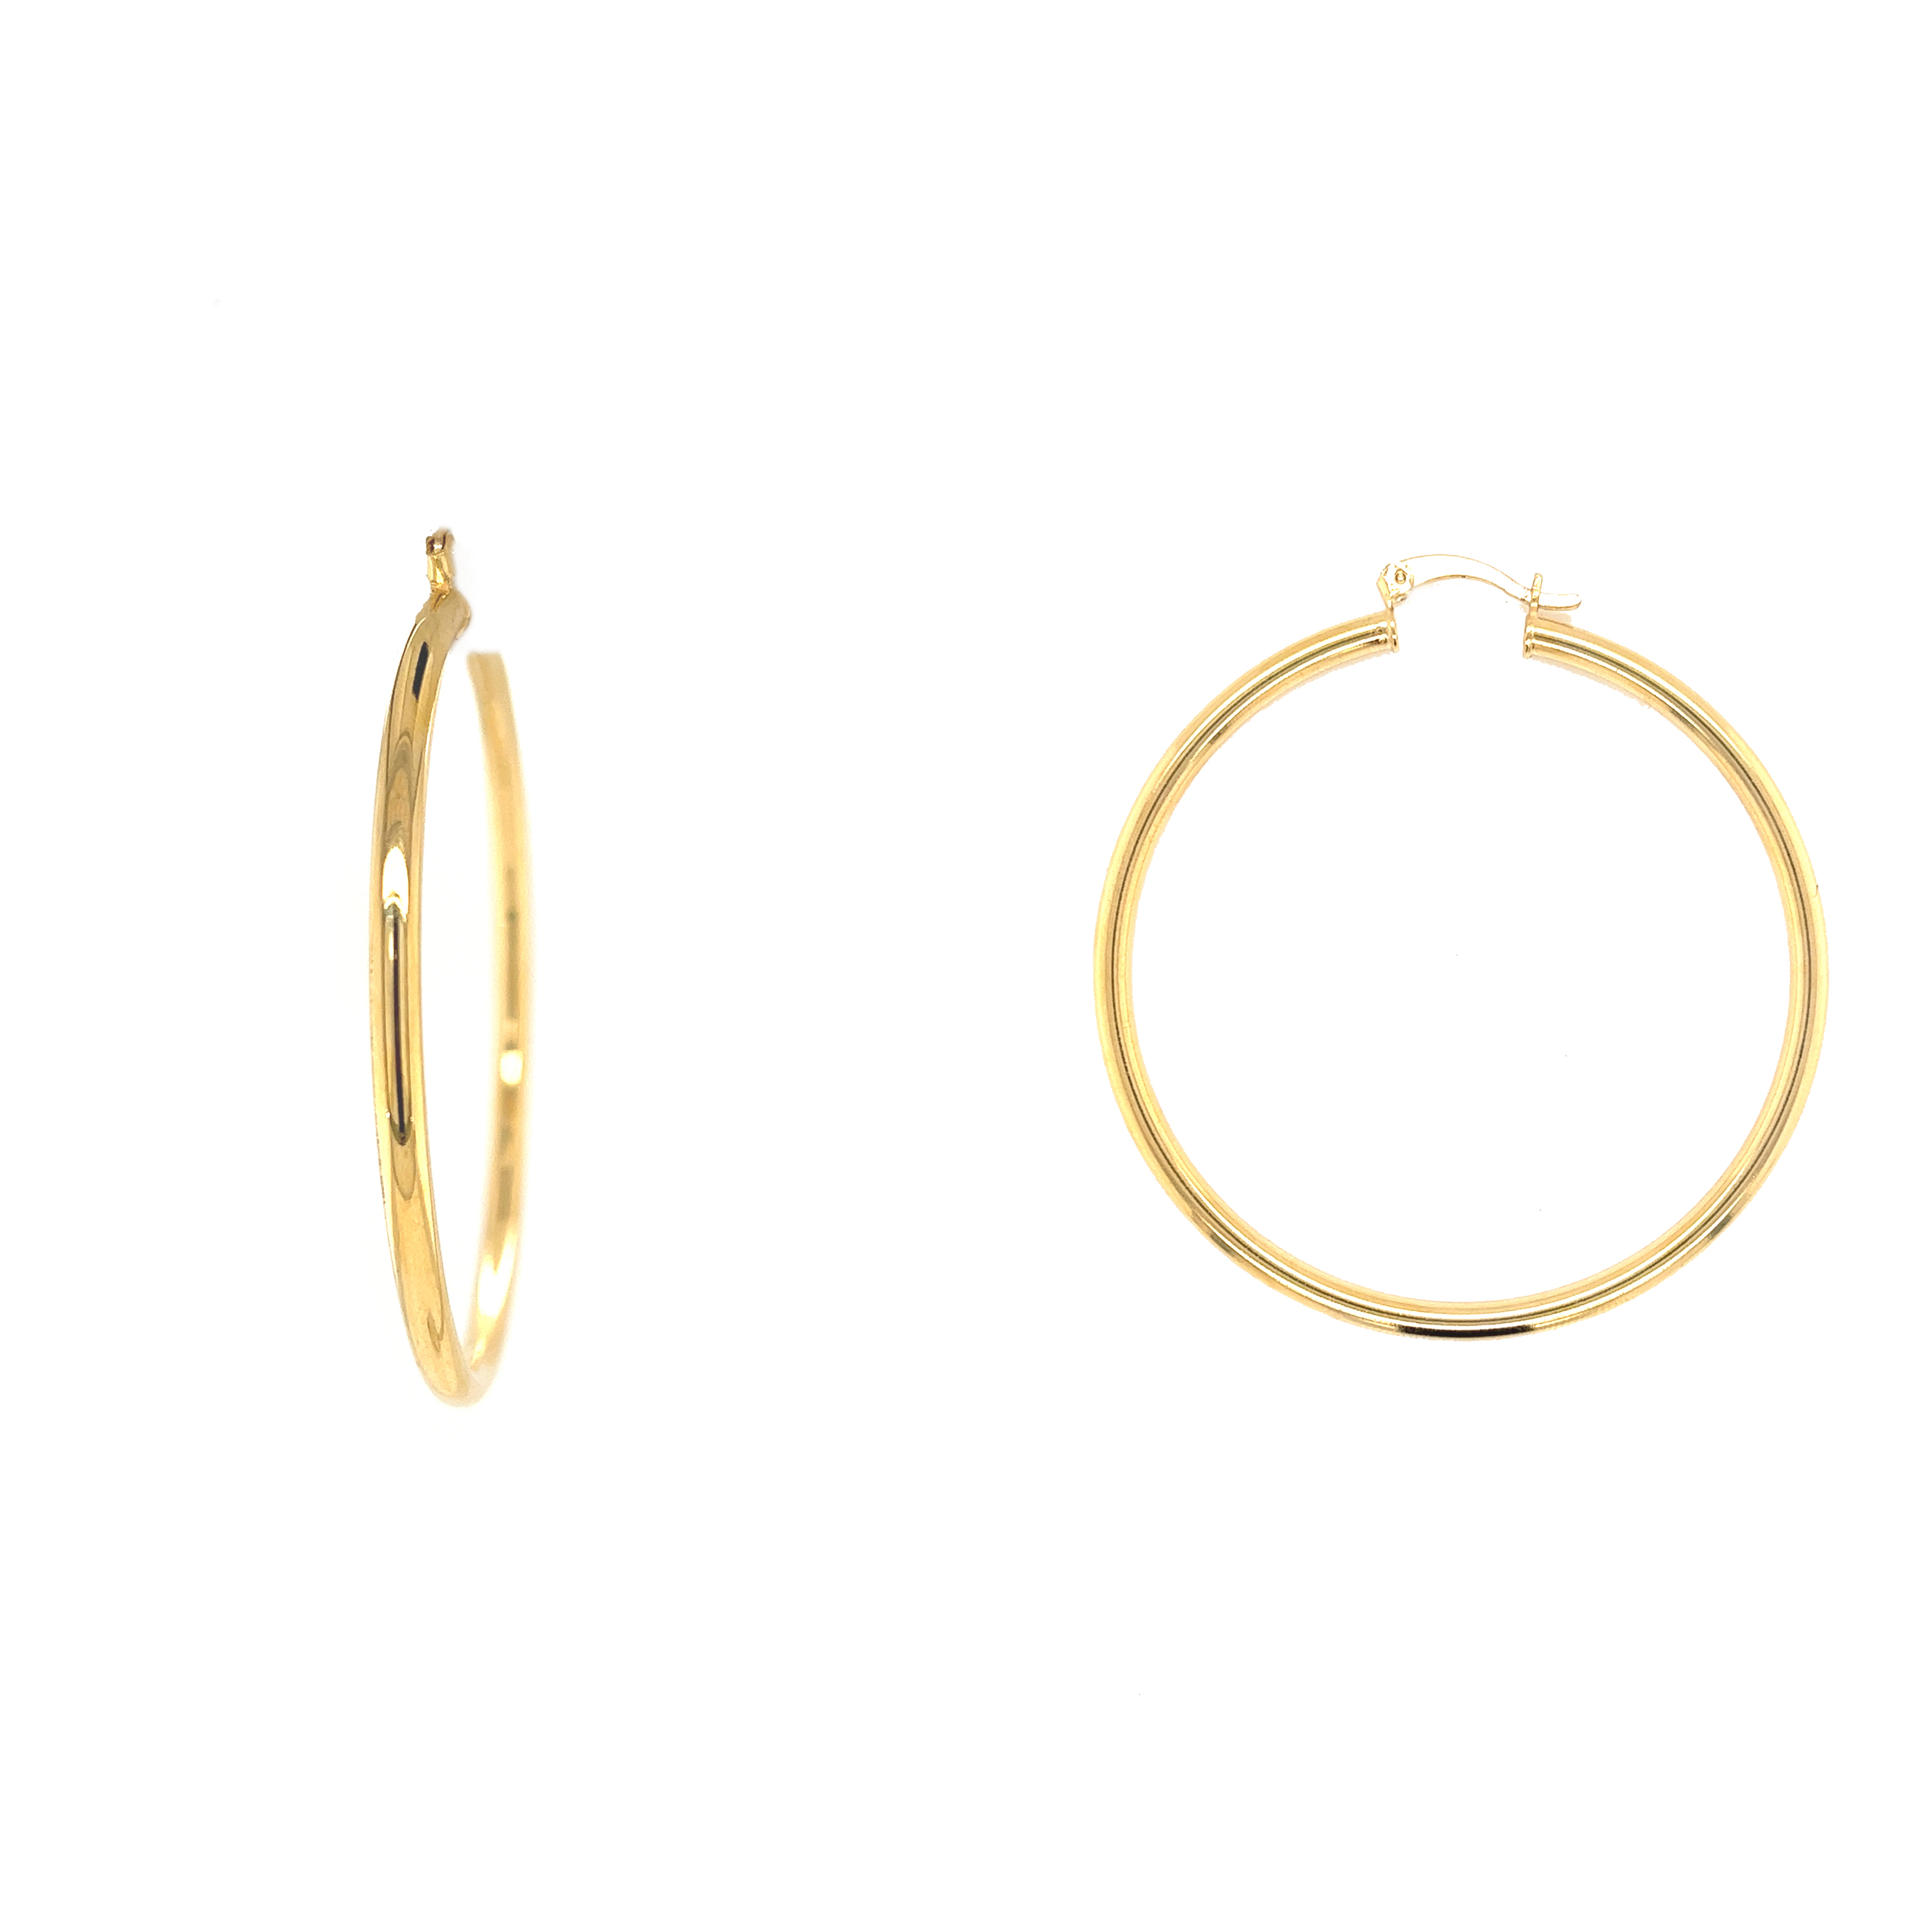 3mm x 50mm Gold Filled Hoops